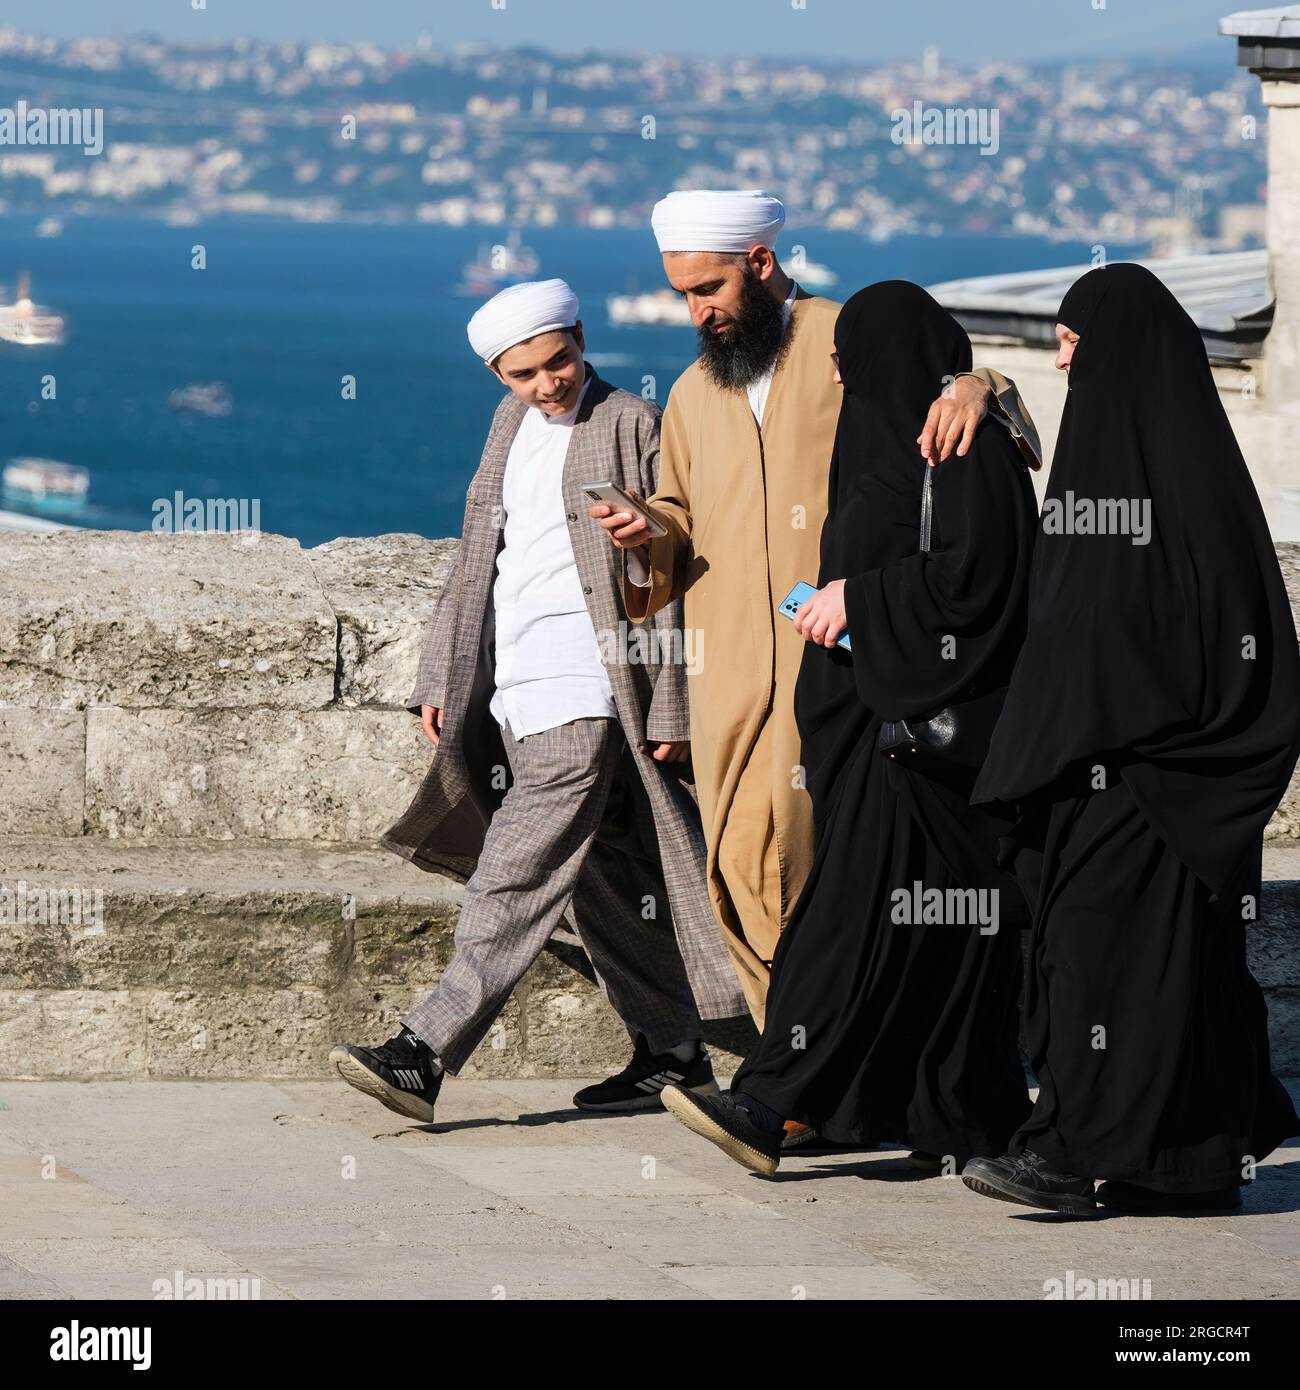 Istanbul, Turkey, Turkiye. Couple in Conservative Religious Dress Walking at the Mosque of Suleyman the Magnificent, Suleymaniye Mosque. Stock Photo